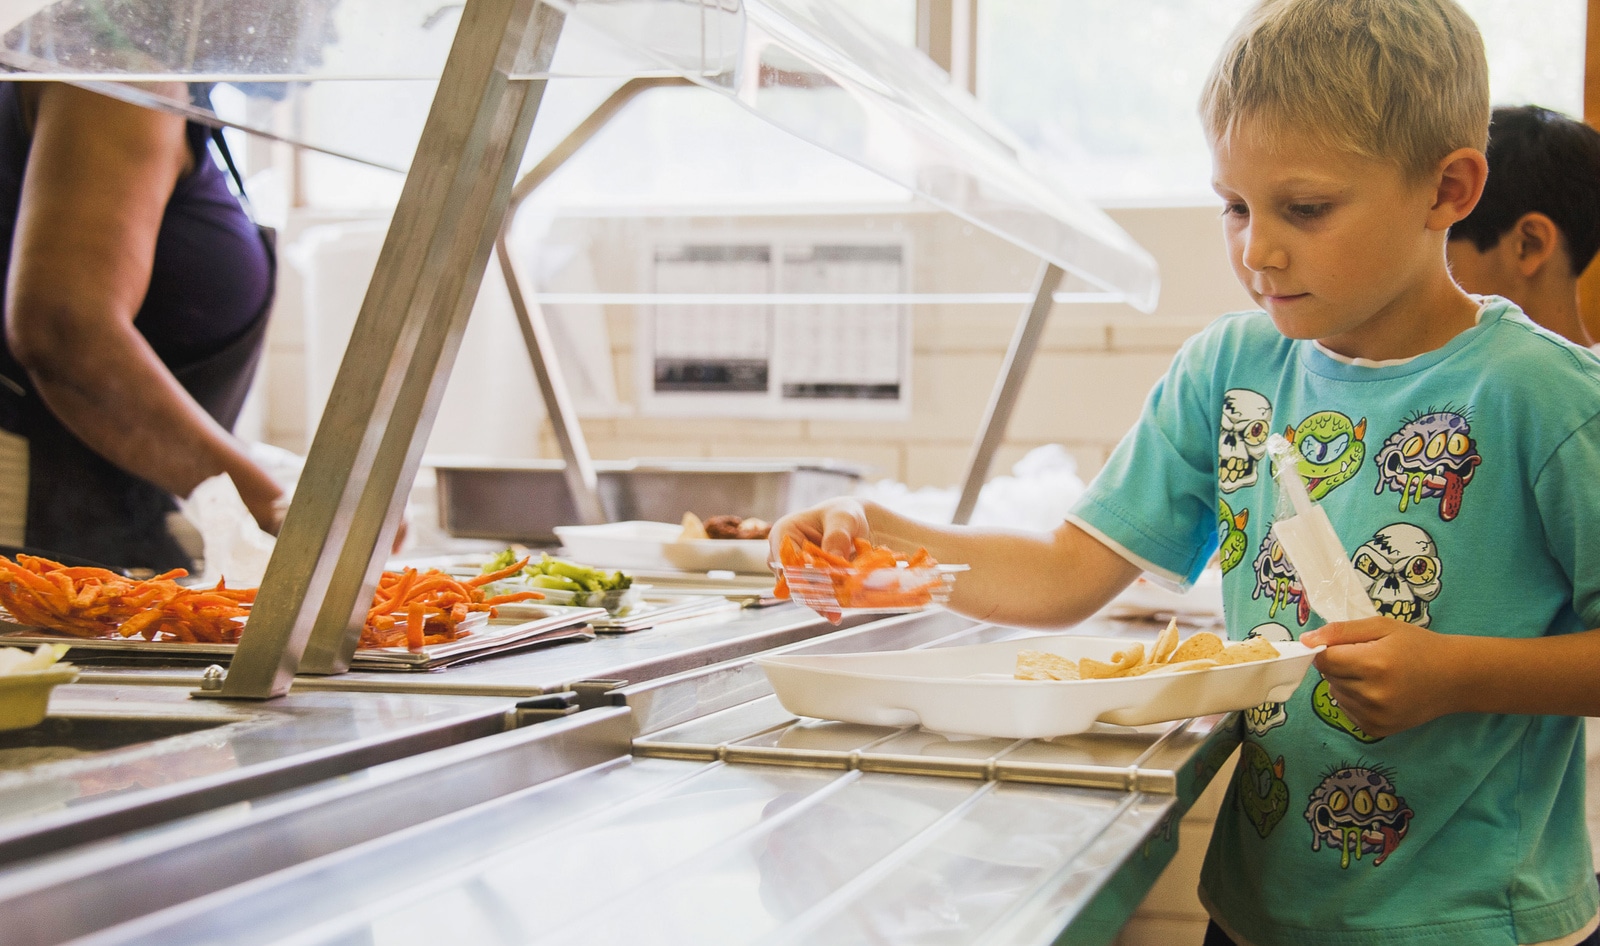 California Is First State to Support Plant-Based School Meals with Historic $700 Million Investment